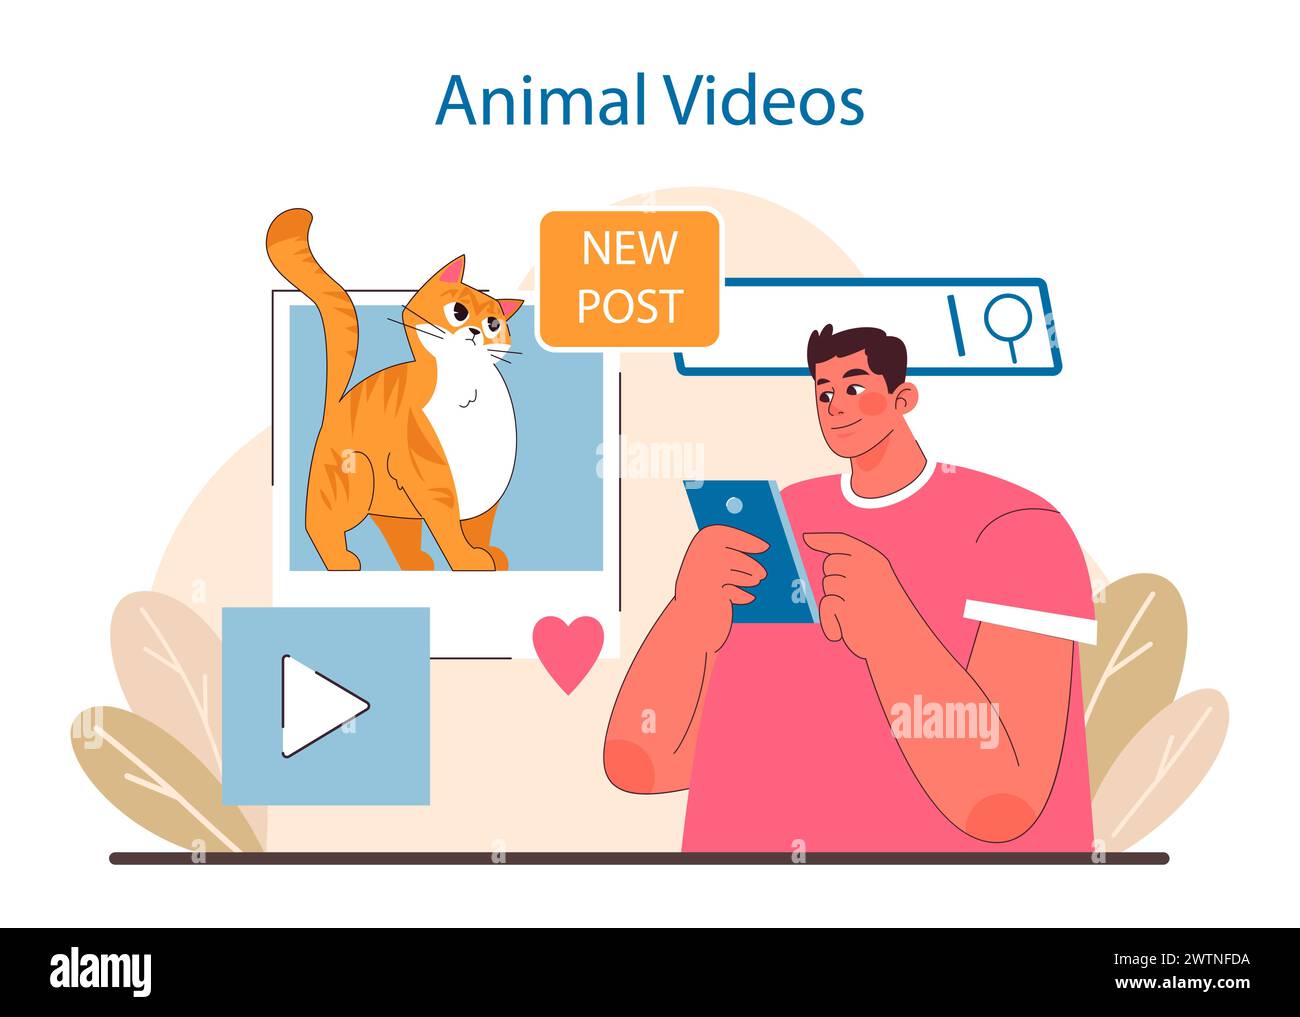 Online Animal Engagement concept. A man shares heartwarming animal videos on a social platform. Capturing the joy of pet content in the digital age. Flat vector illustration. Stock Vector